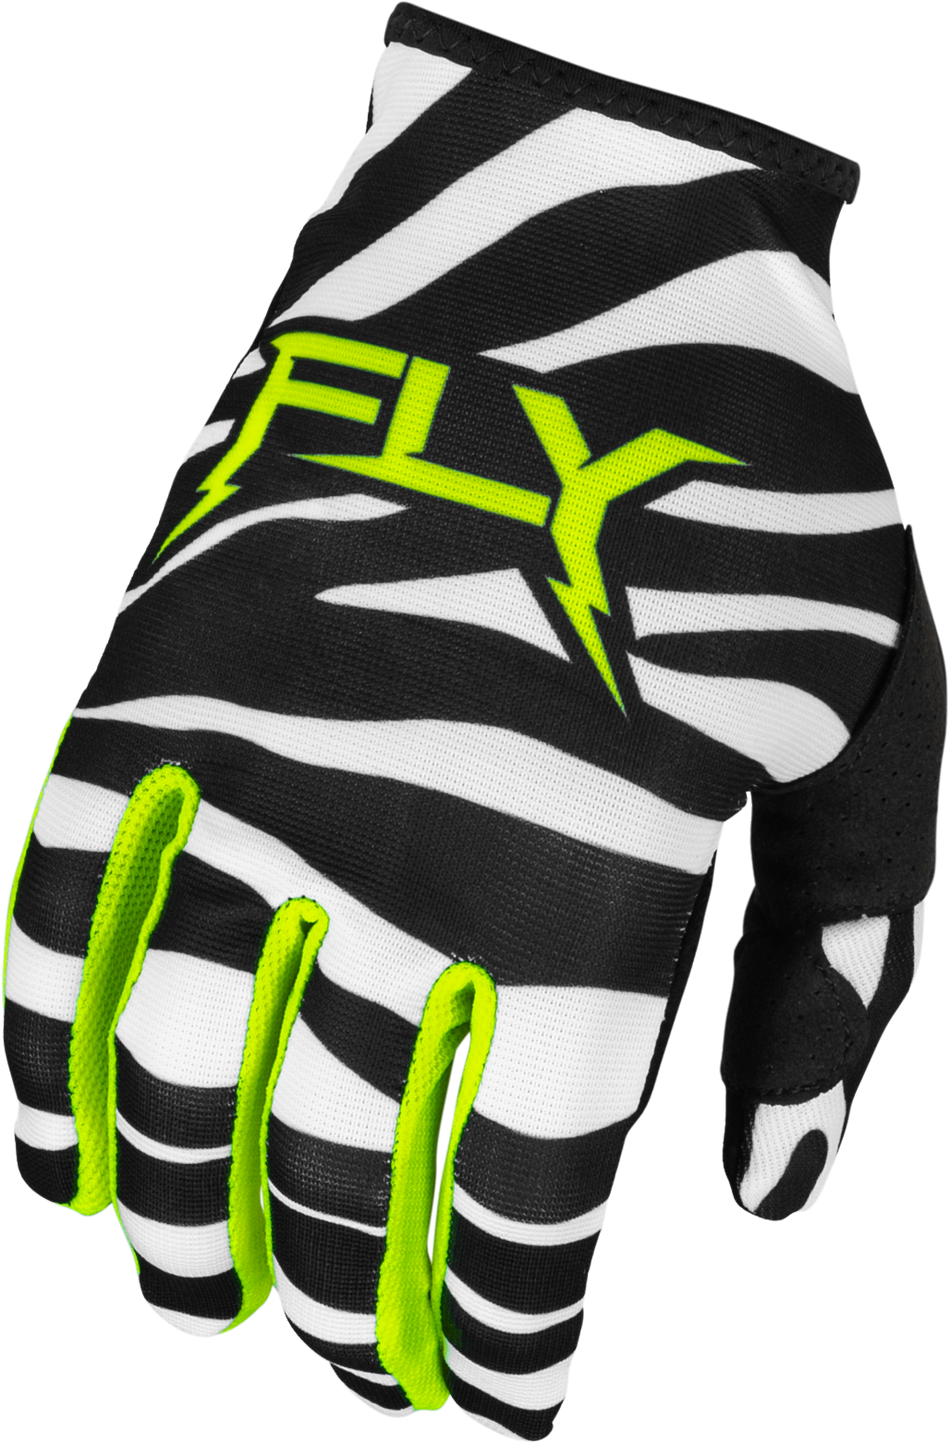 FLY RACING Youth Lite Uncaged Gloves Black/White/Neon Green Yl 377-742YL